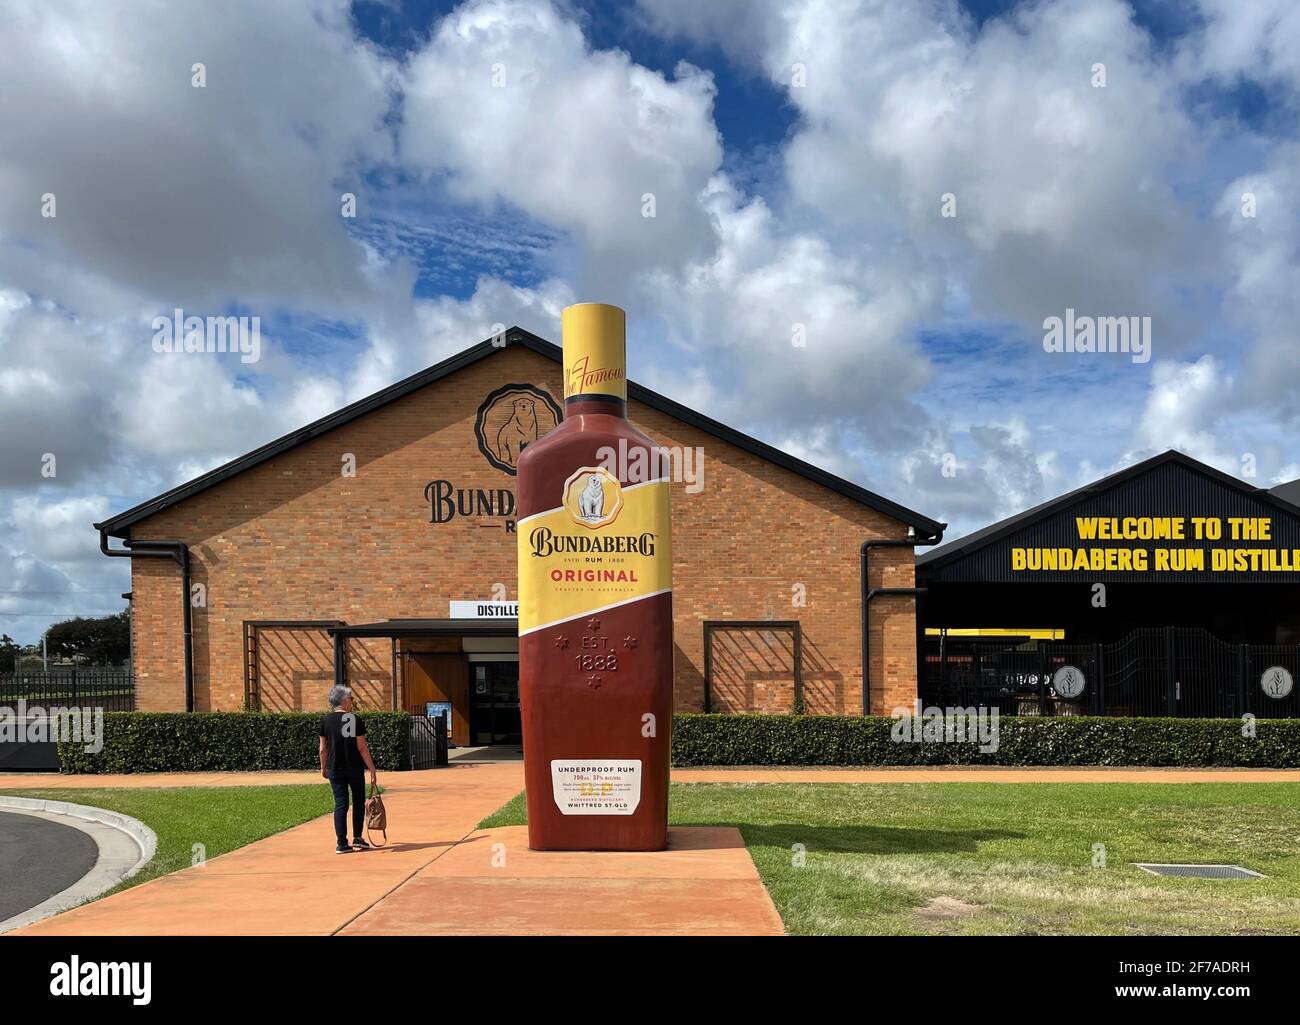 Facade of the Rum Distillery which commenced operations in 1888 with first production in 1889, in Bundaberg, Queensland, Australia Stock Photo